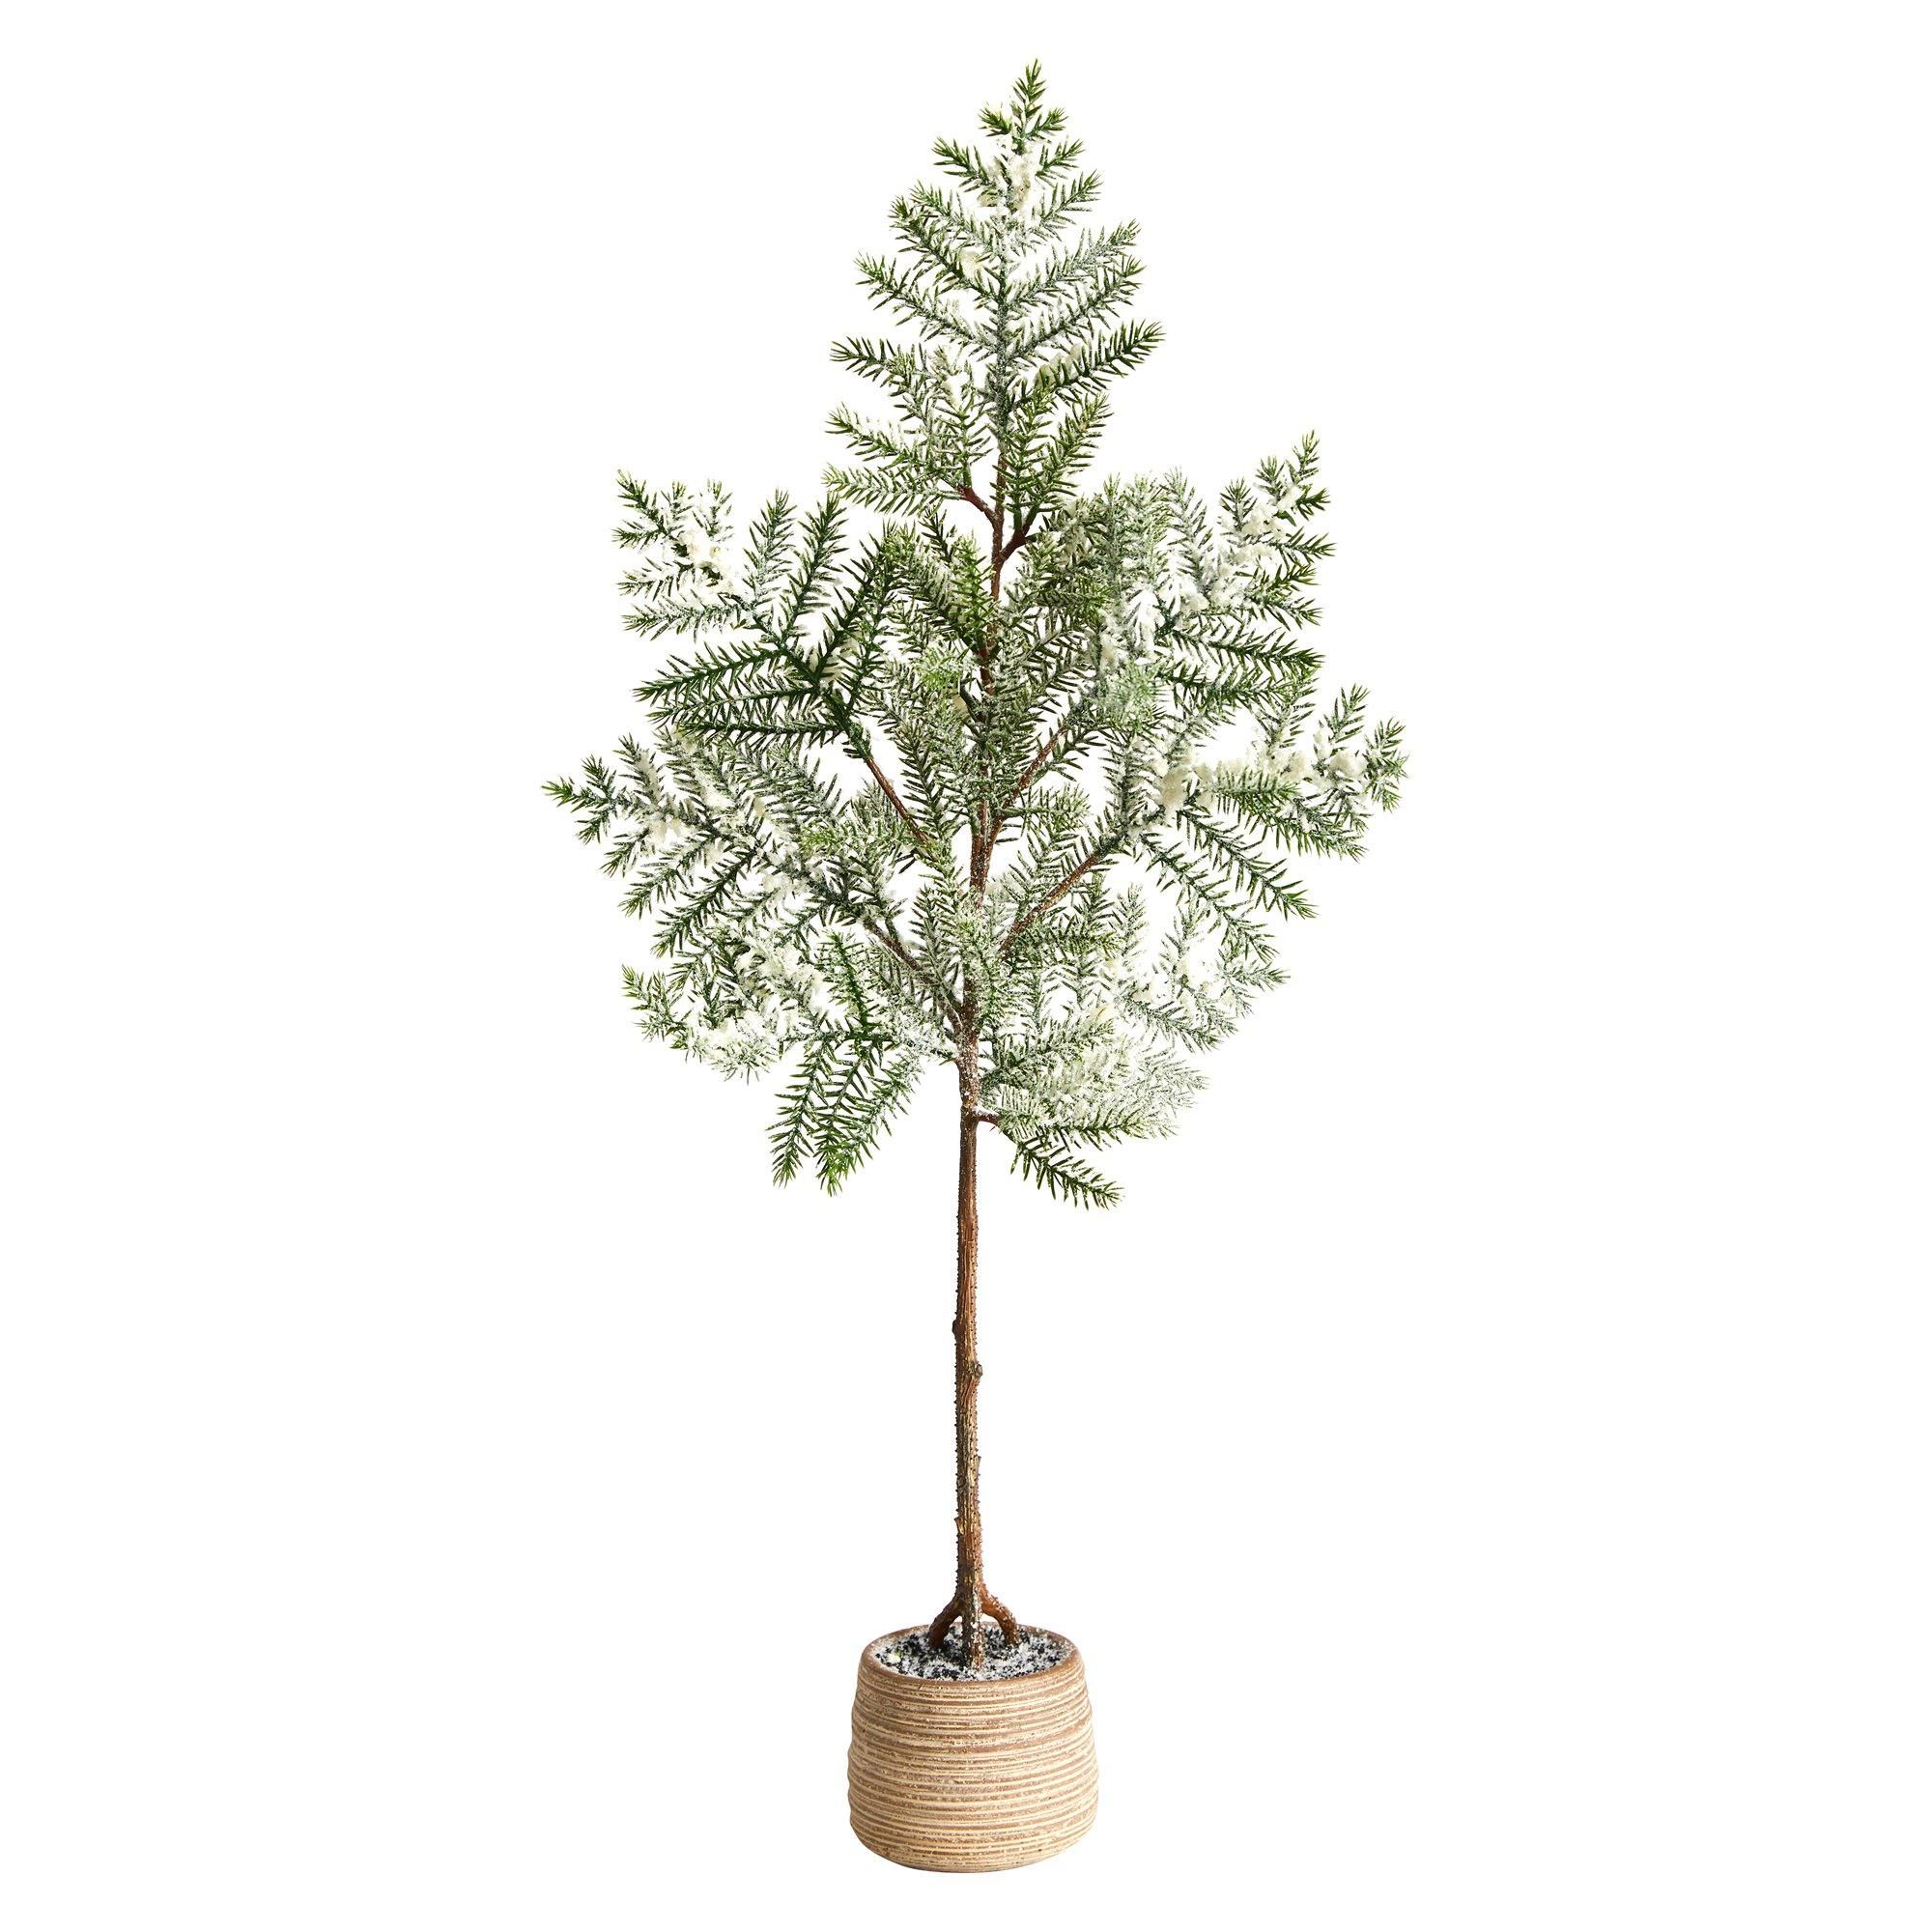 35'' Frosted Pine Artificial Christmas Tree in Decorative Planter | Nearly Natural